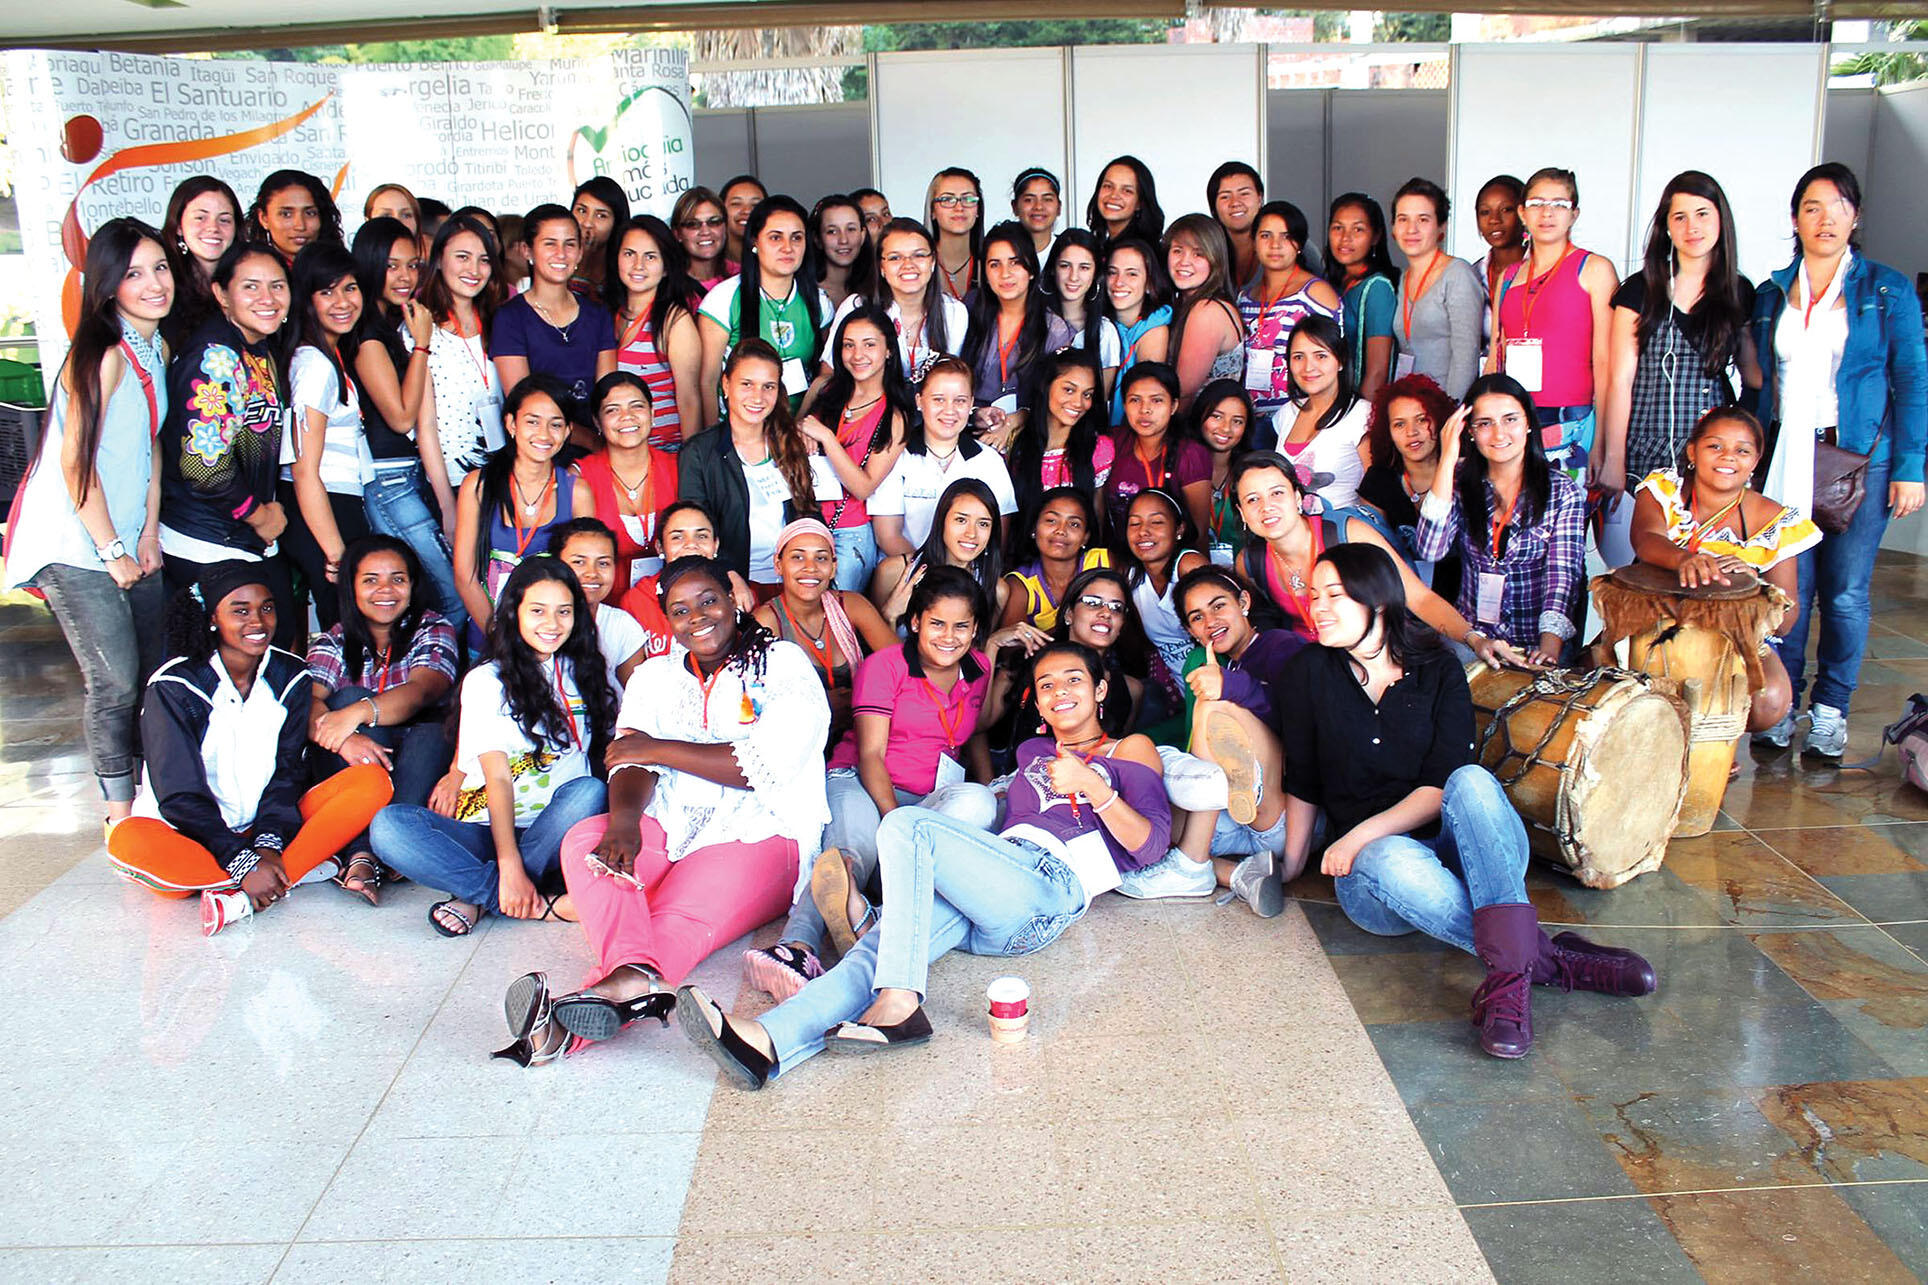 A group of young women are the finalists in Antioquia's "Talented Young Women Contest." (Photo by Alejandro Moreno.)